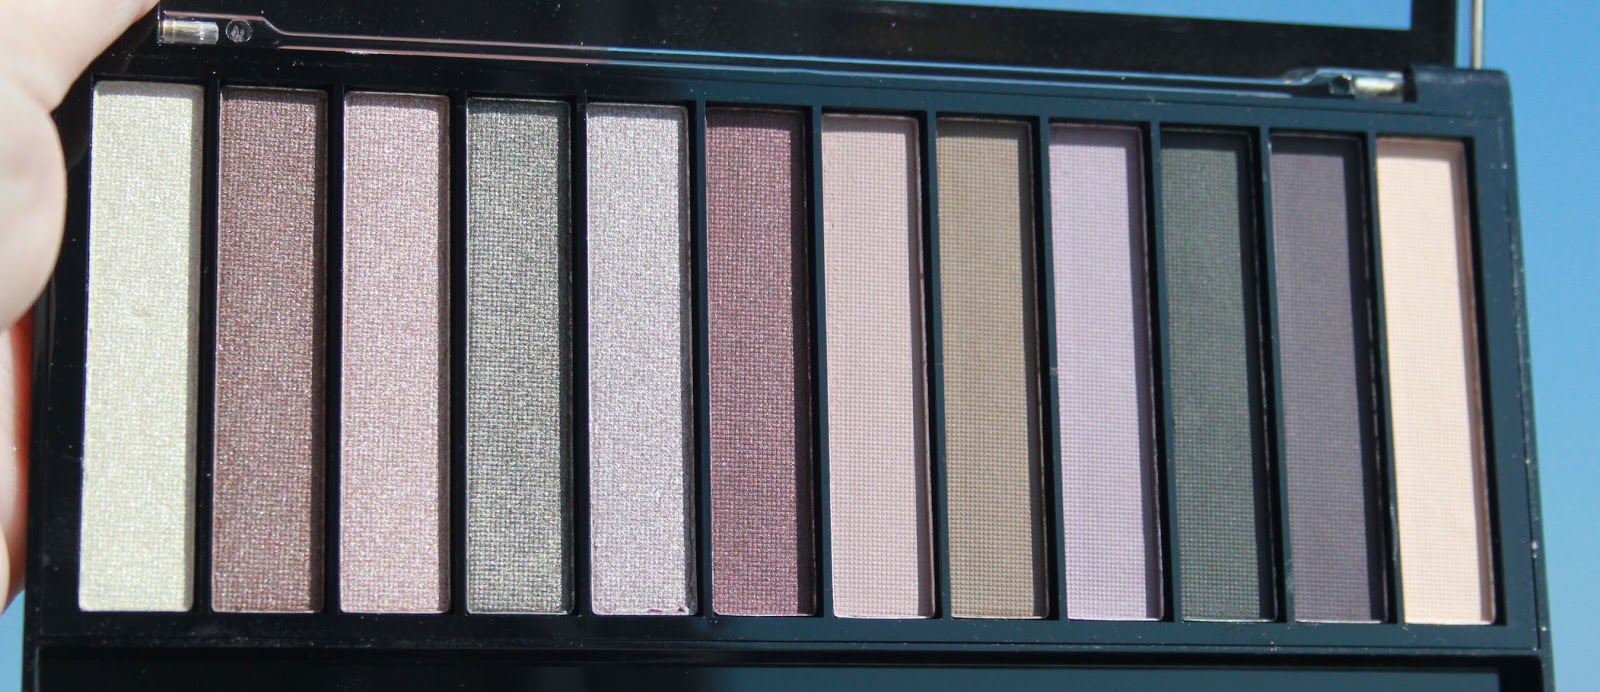 Makeup Revolution Romantic Smoked palette swatches